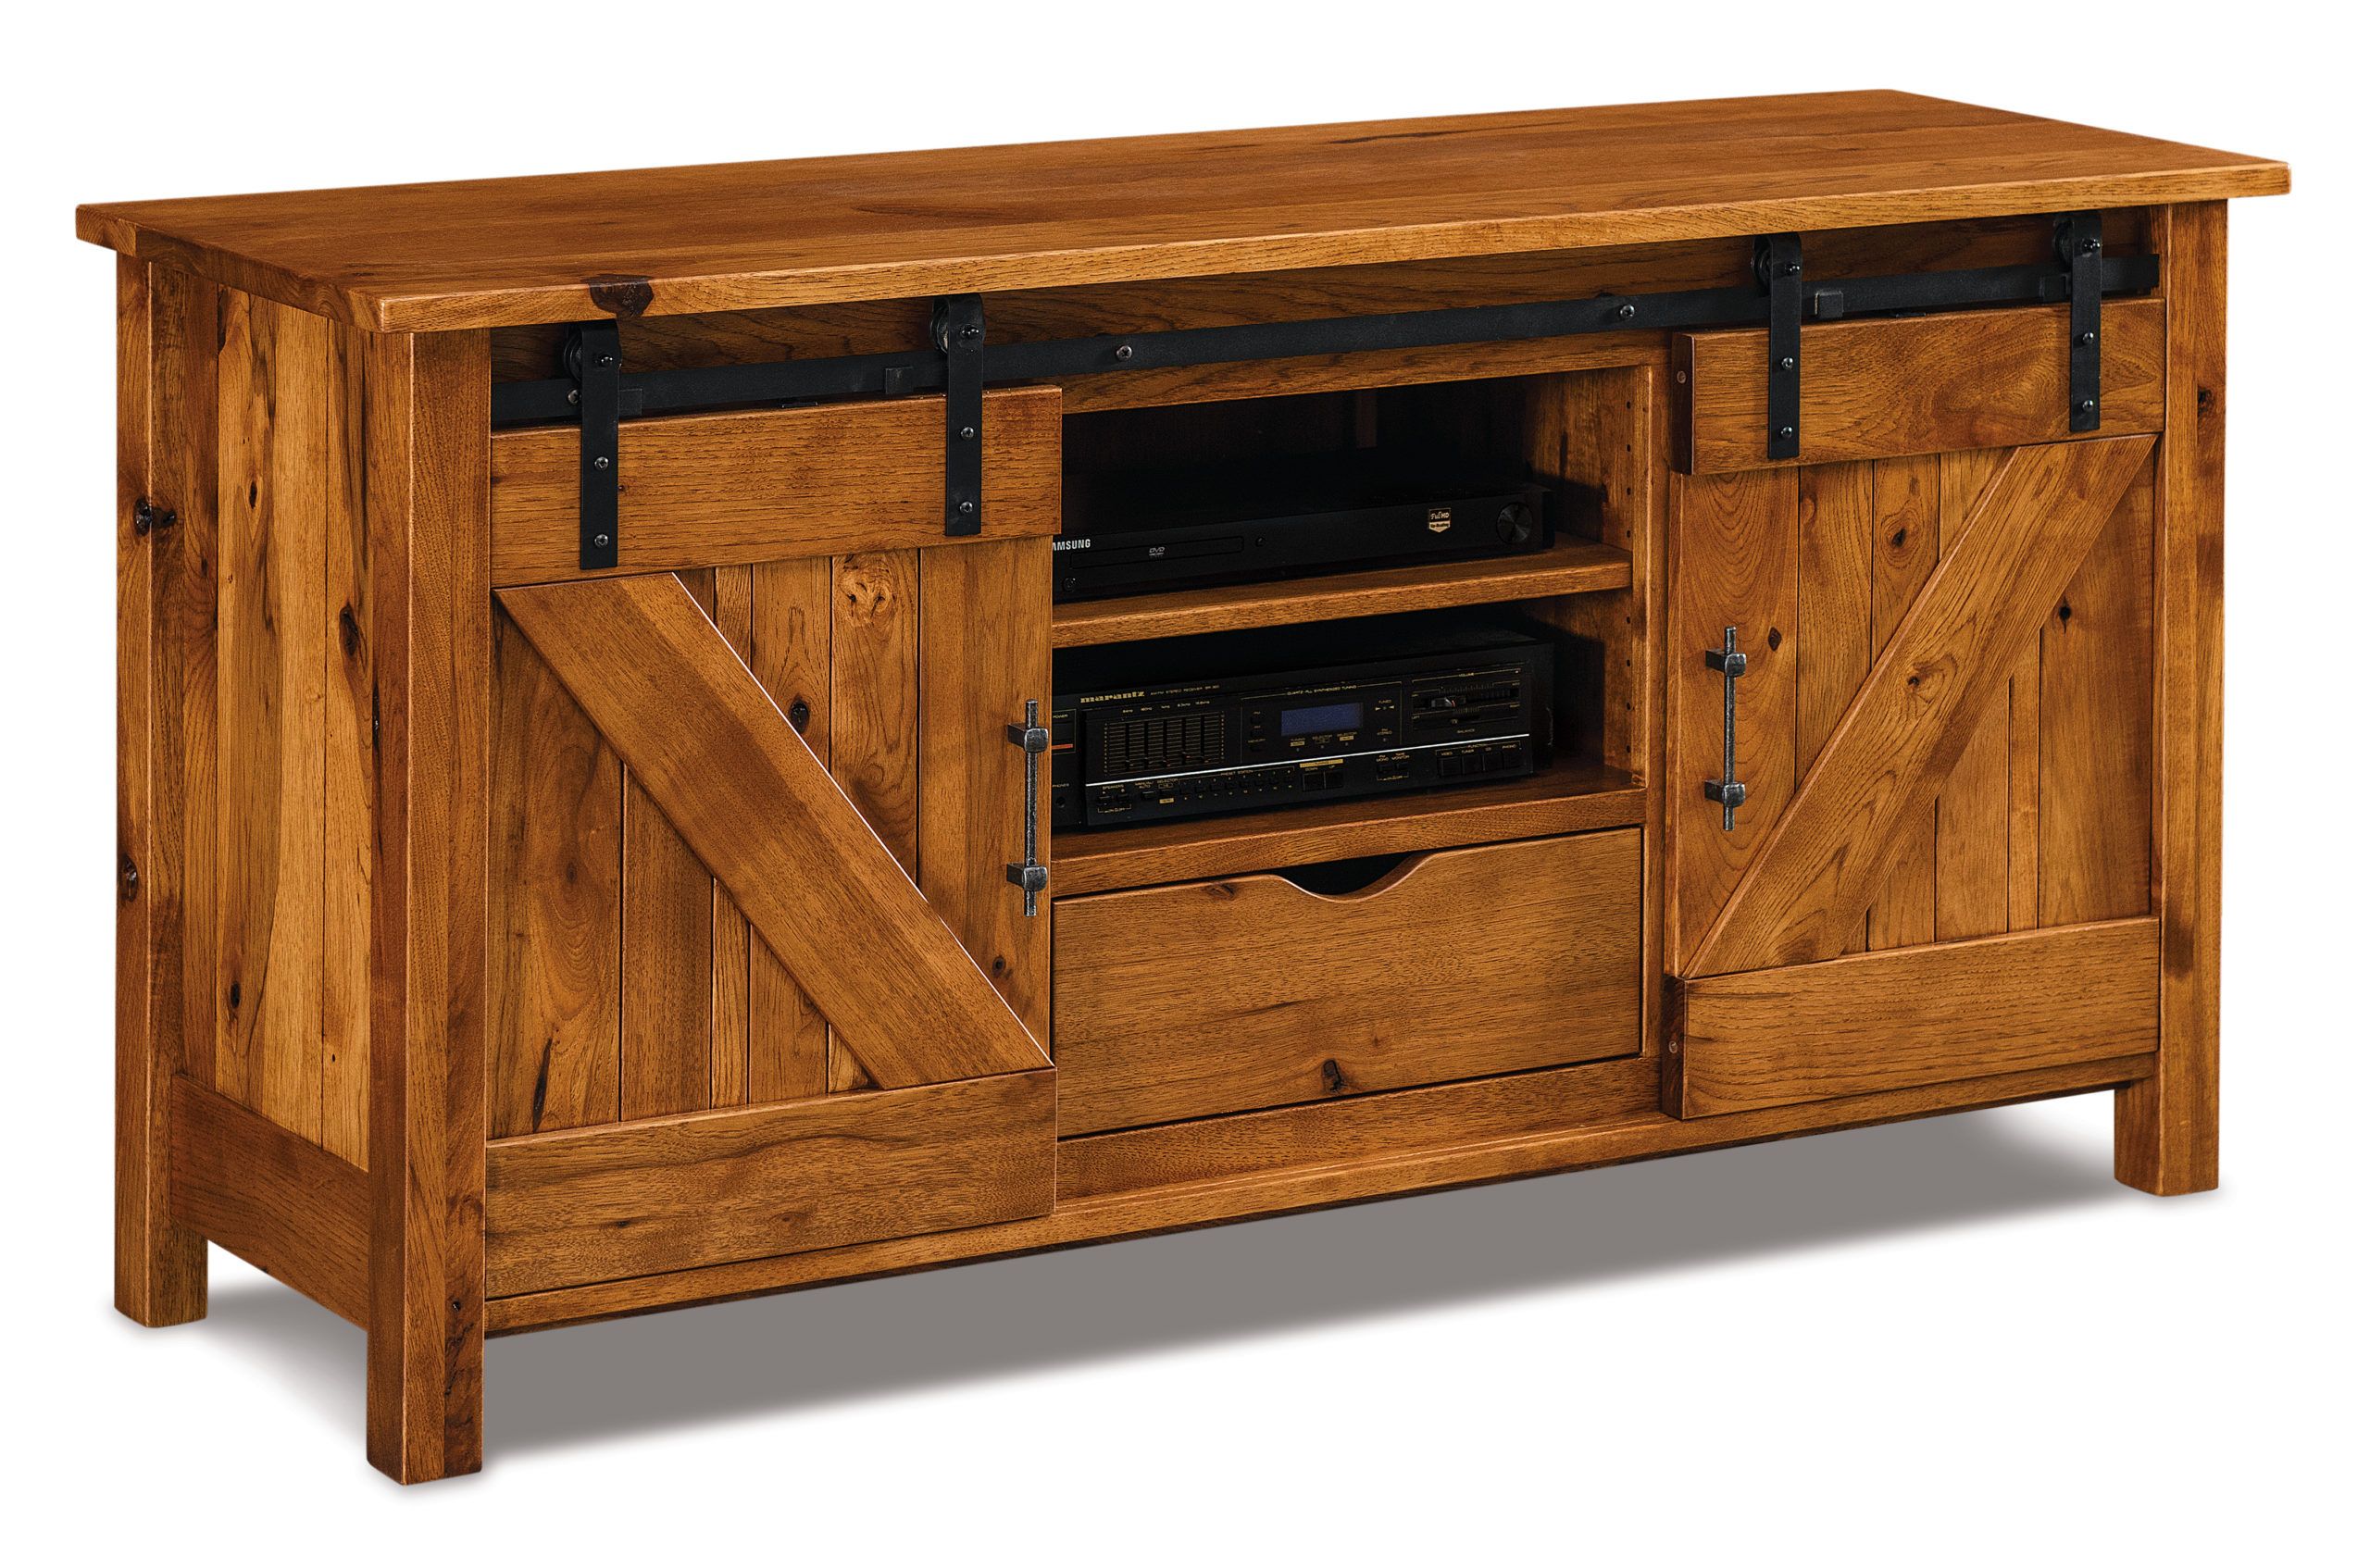 Timbra Tv Stand | Amish Solid Wood Tv Stands | Kvadro With Regard To Oak Tv Stands Furniture (View 2 of 15)